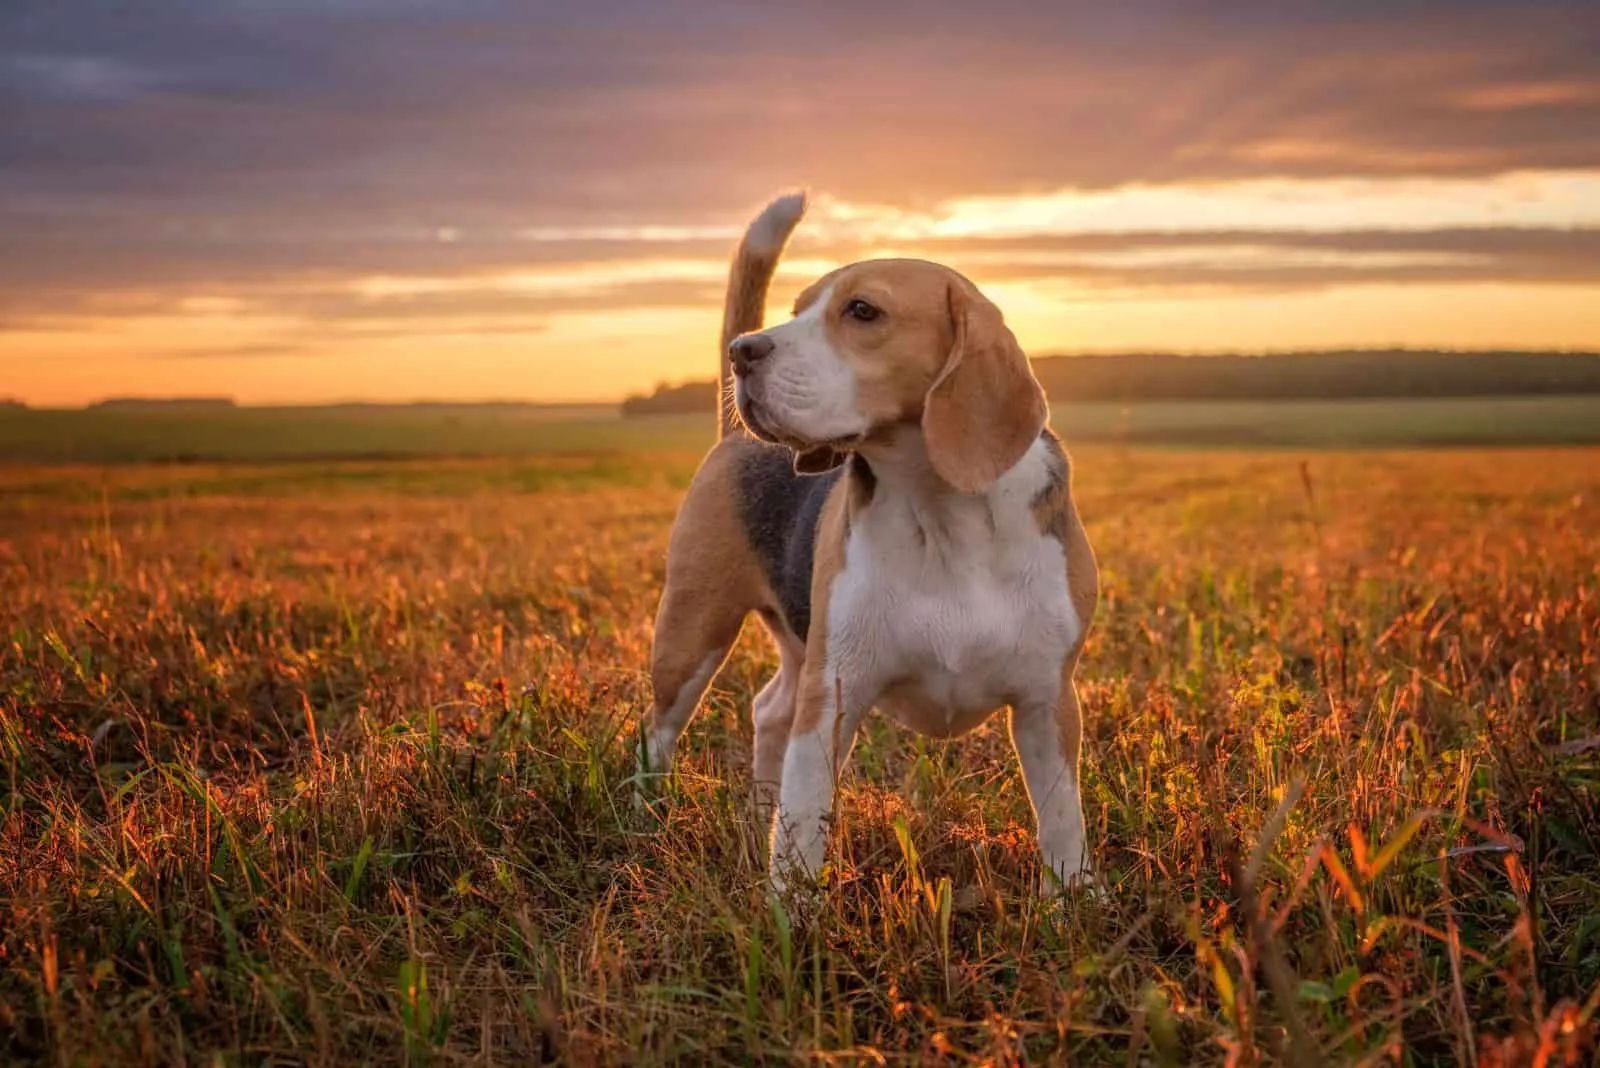 A beagle stands in a field during sunset